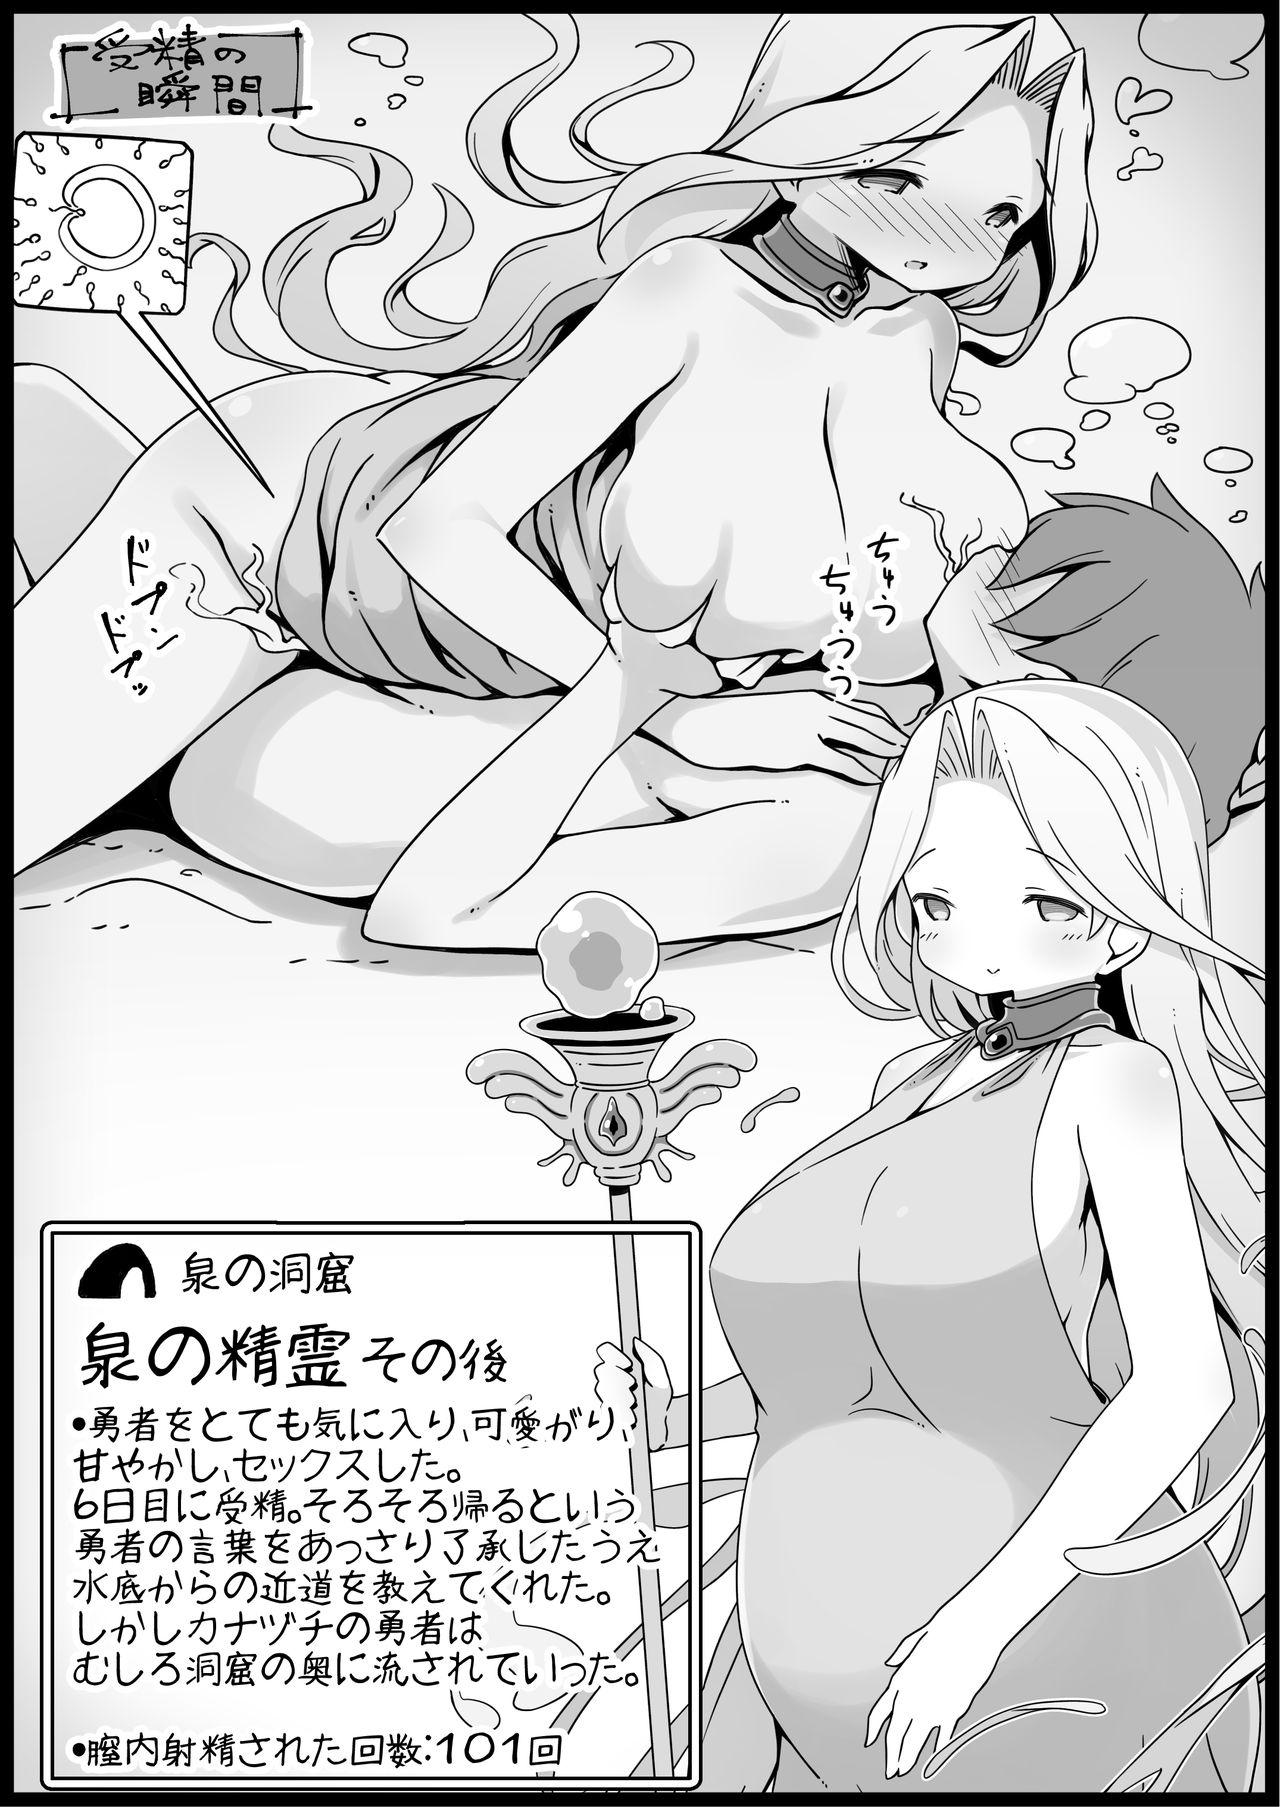 [Succubus Egg] Fantasy World 2 Too Forgiving to Heroes-Continued NPC (mob) Opponent-Centered Short H Manga Collection- 43